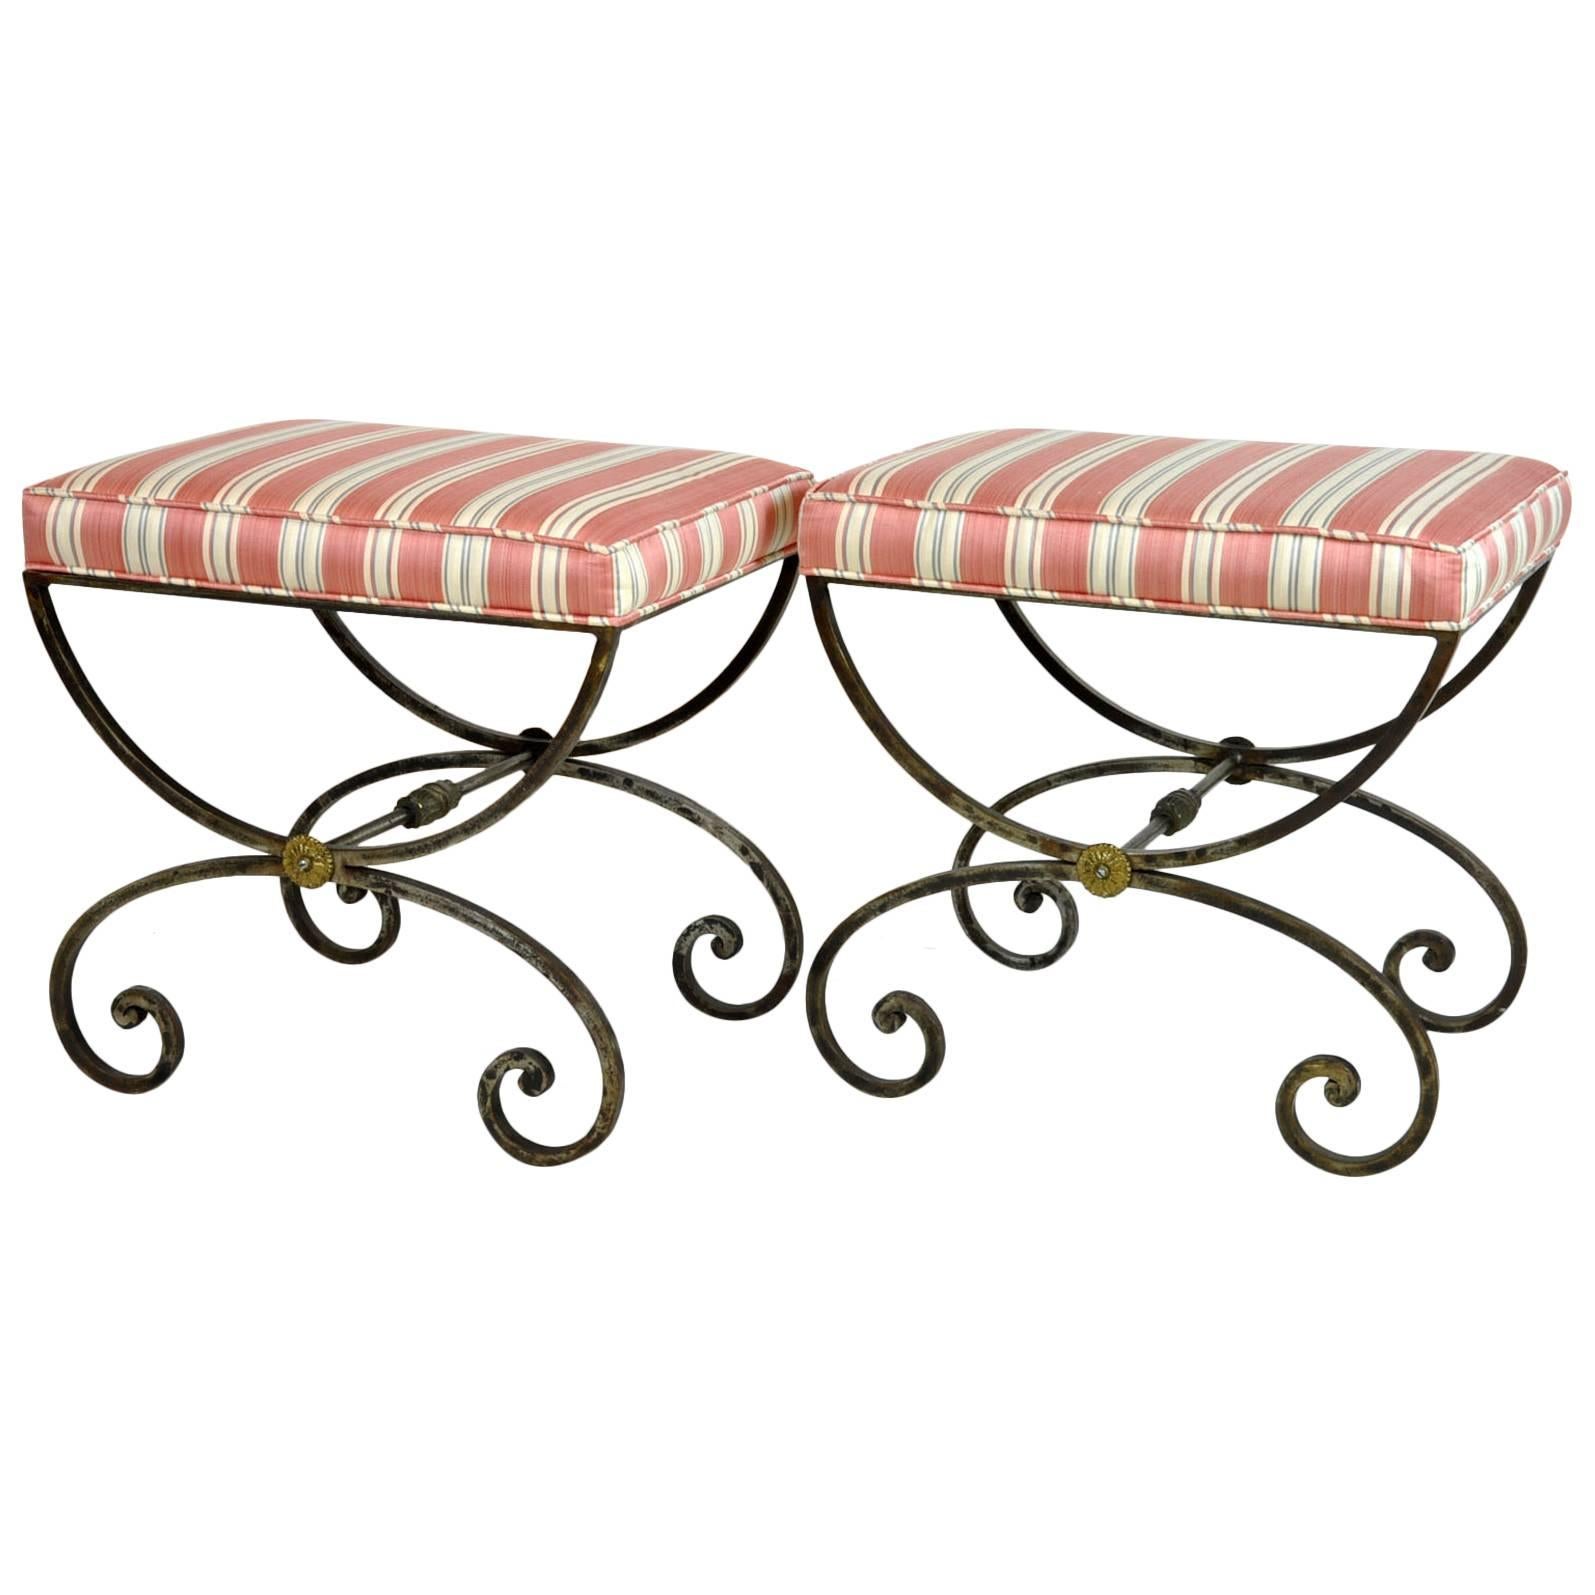 Pair of Wrought Iron and Brass Vintage Benches